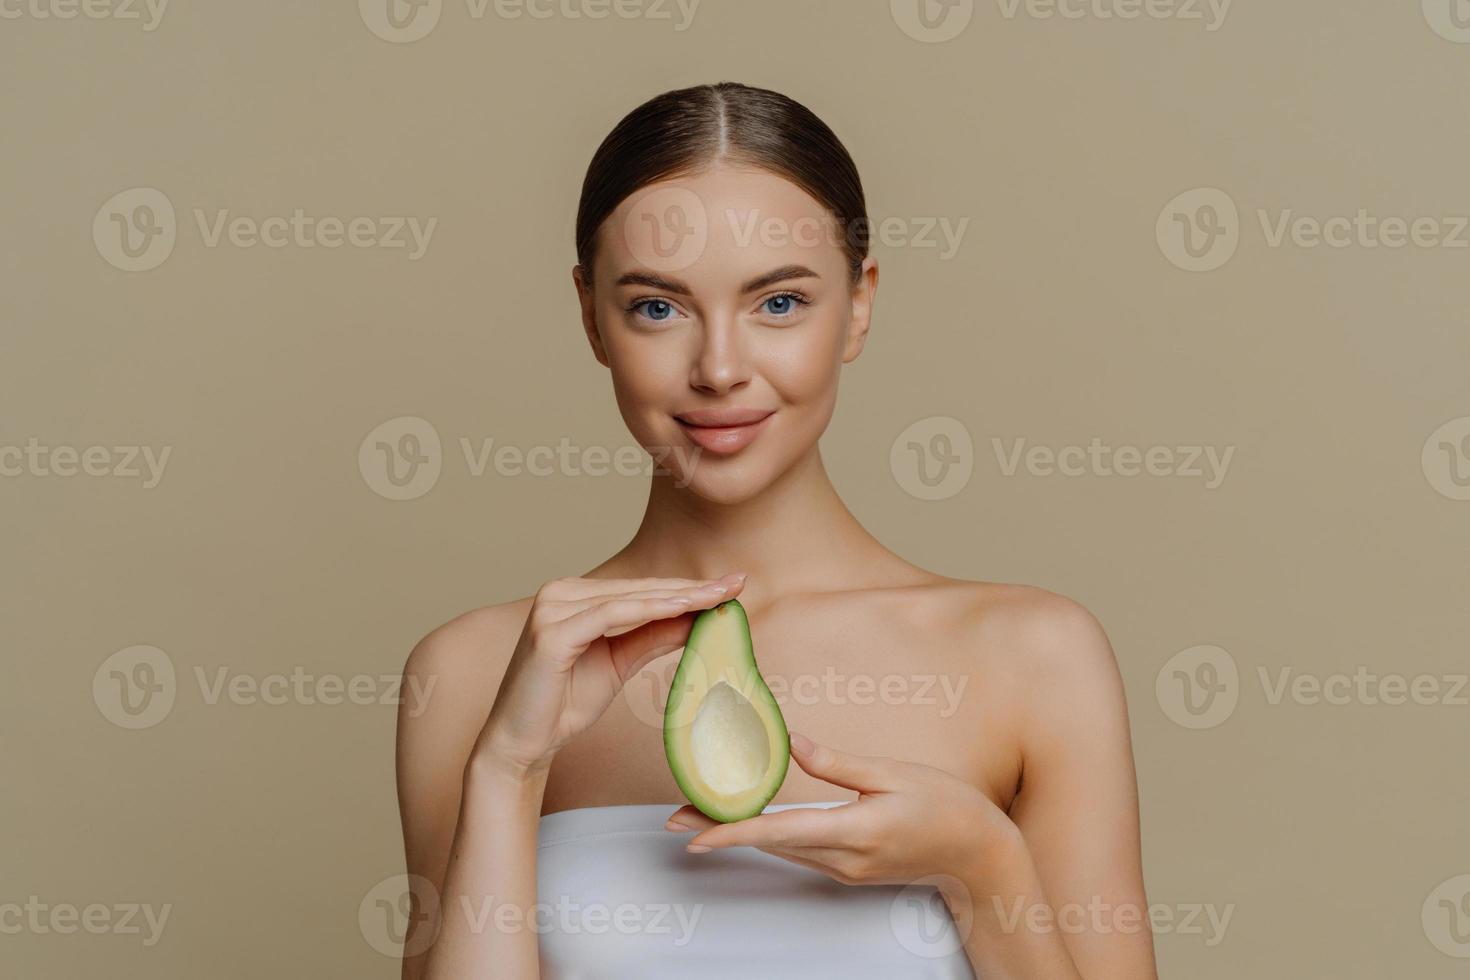 Hygiene skin care and facial treatments concept. Indoor shot of pleased female model holds half of avocado wrapped in bath towel going to use beauty product nourishes skin isolated over beige wall photo